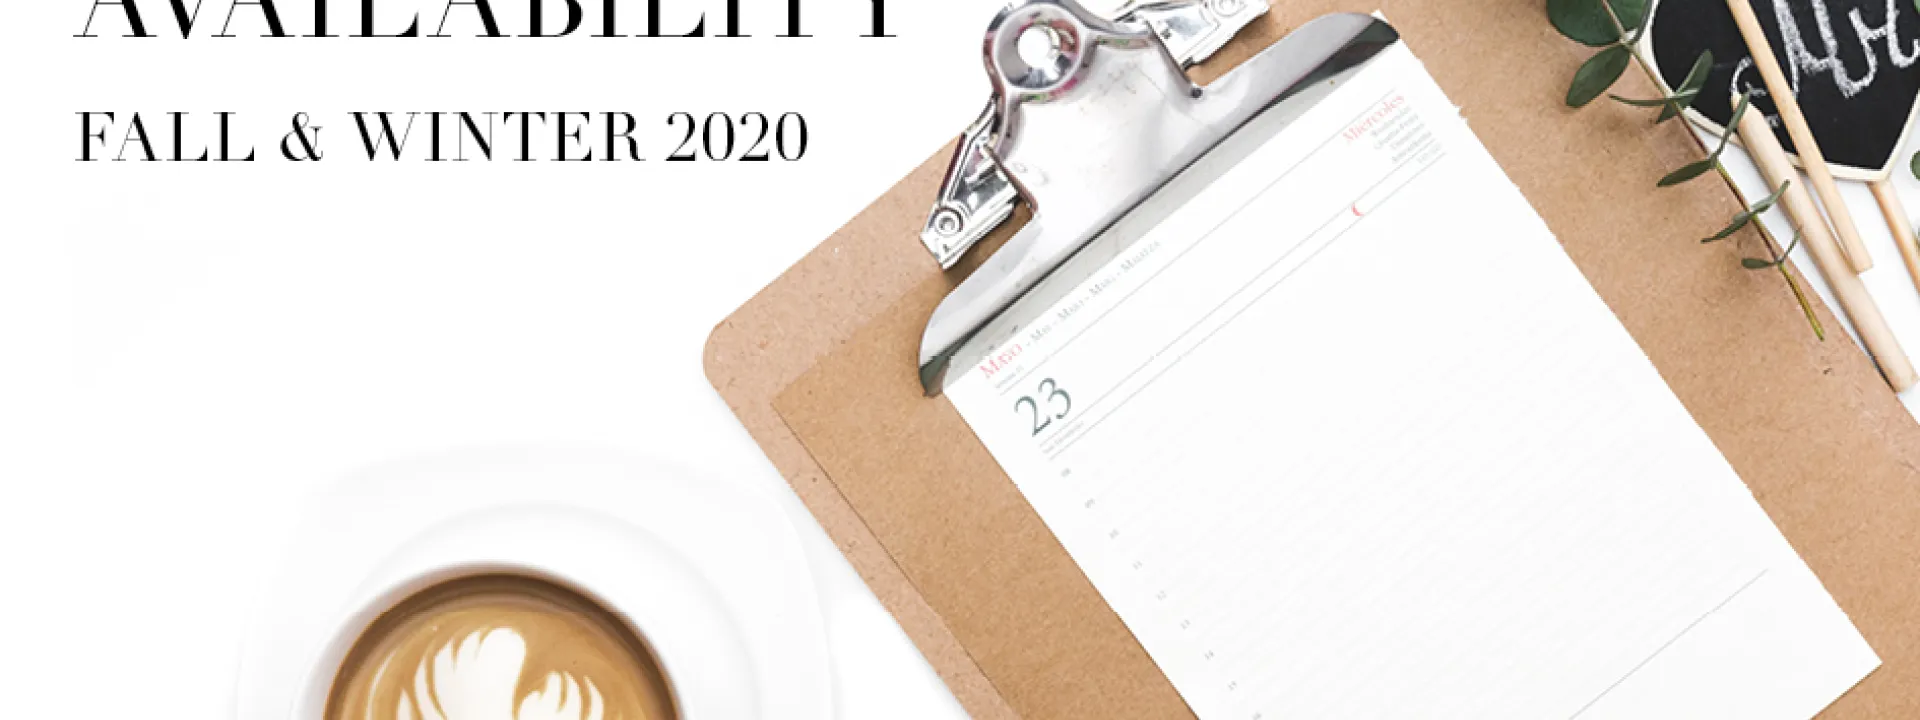 Wedding vendor availability for fall and winter 2020, with a coffee, calendar and clipboard.